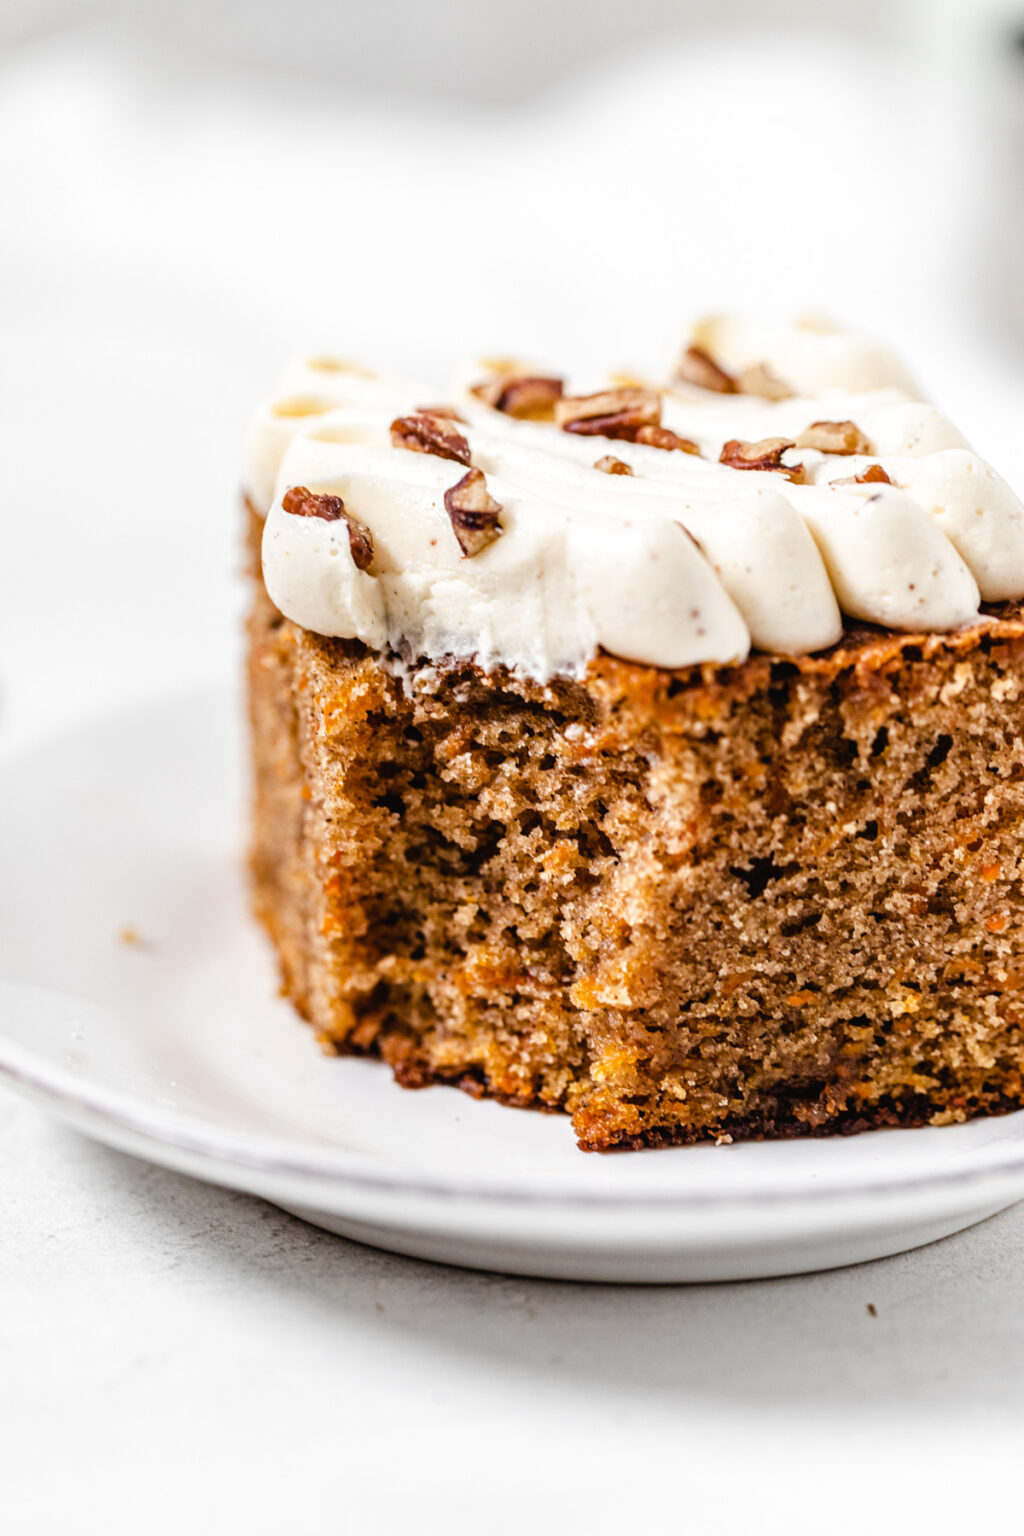 Carrot Cake with Brown Butter Cream Cheese Frosting |Queenslee Appétit